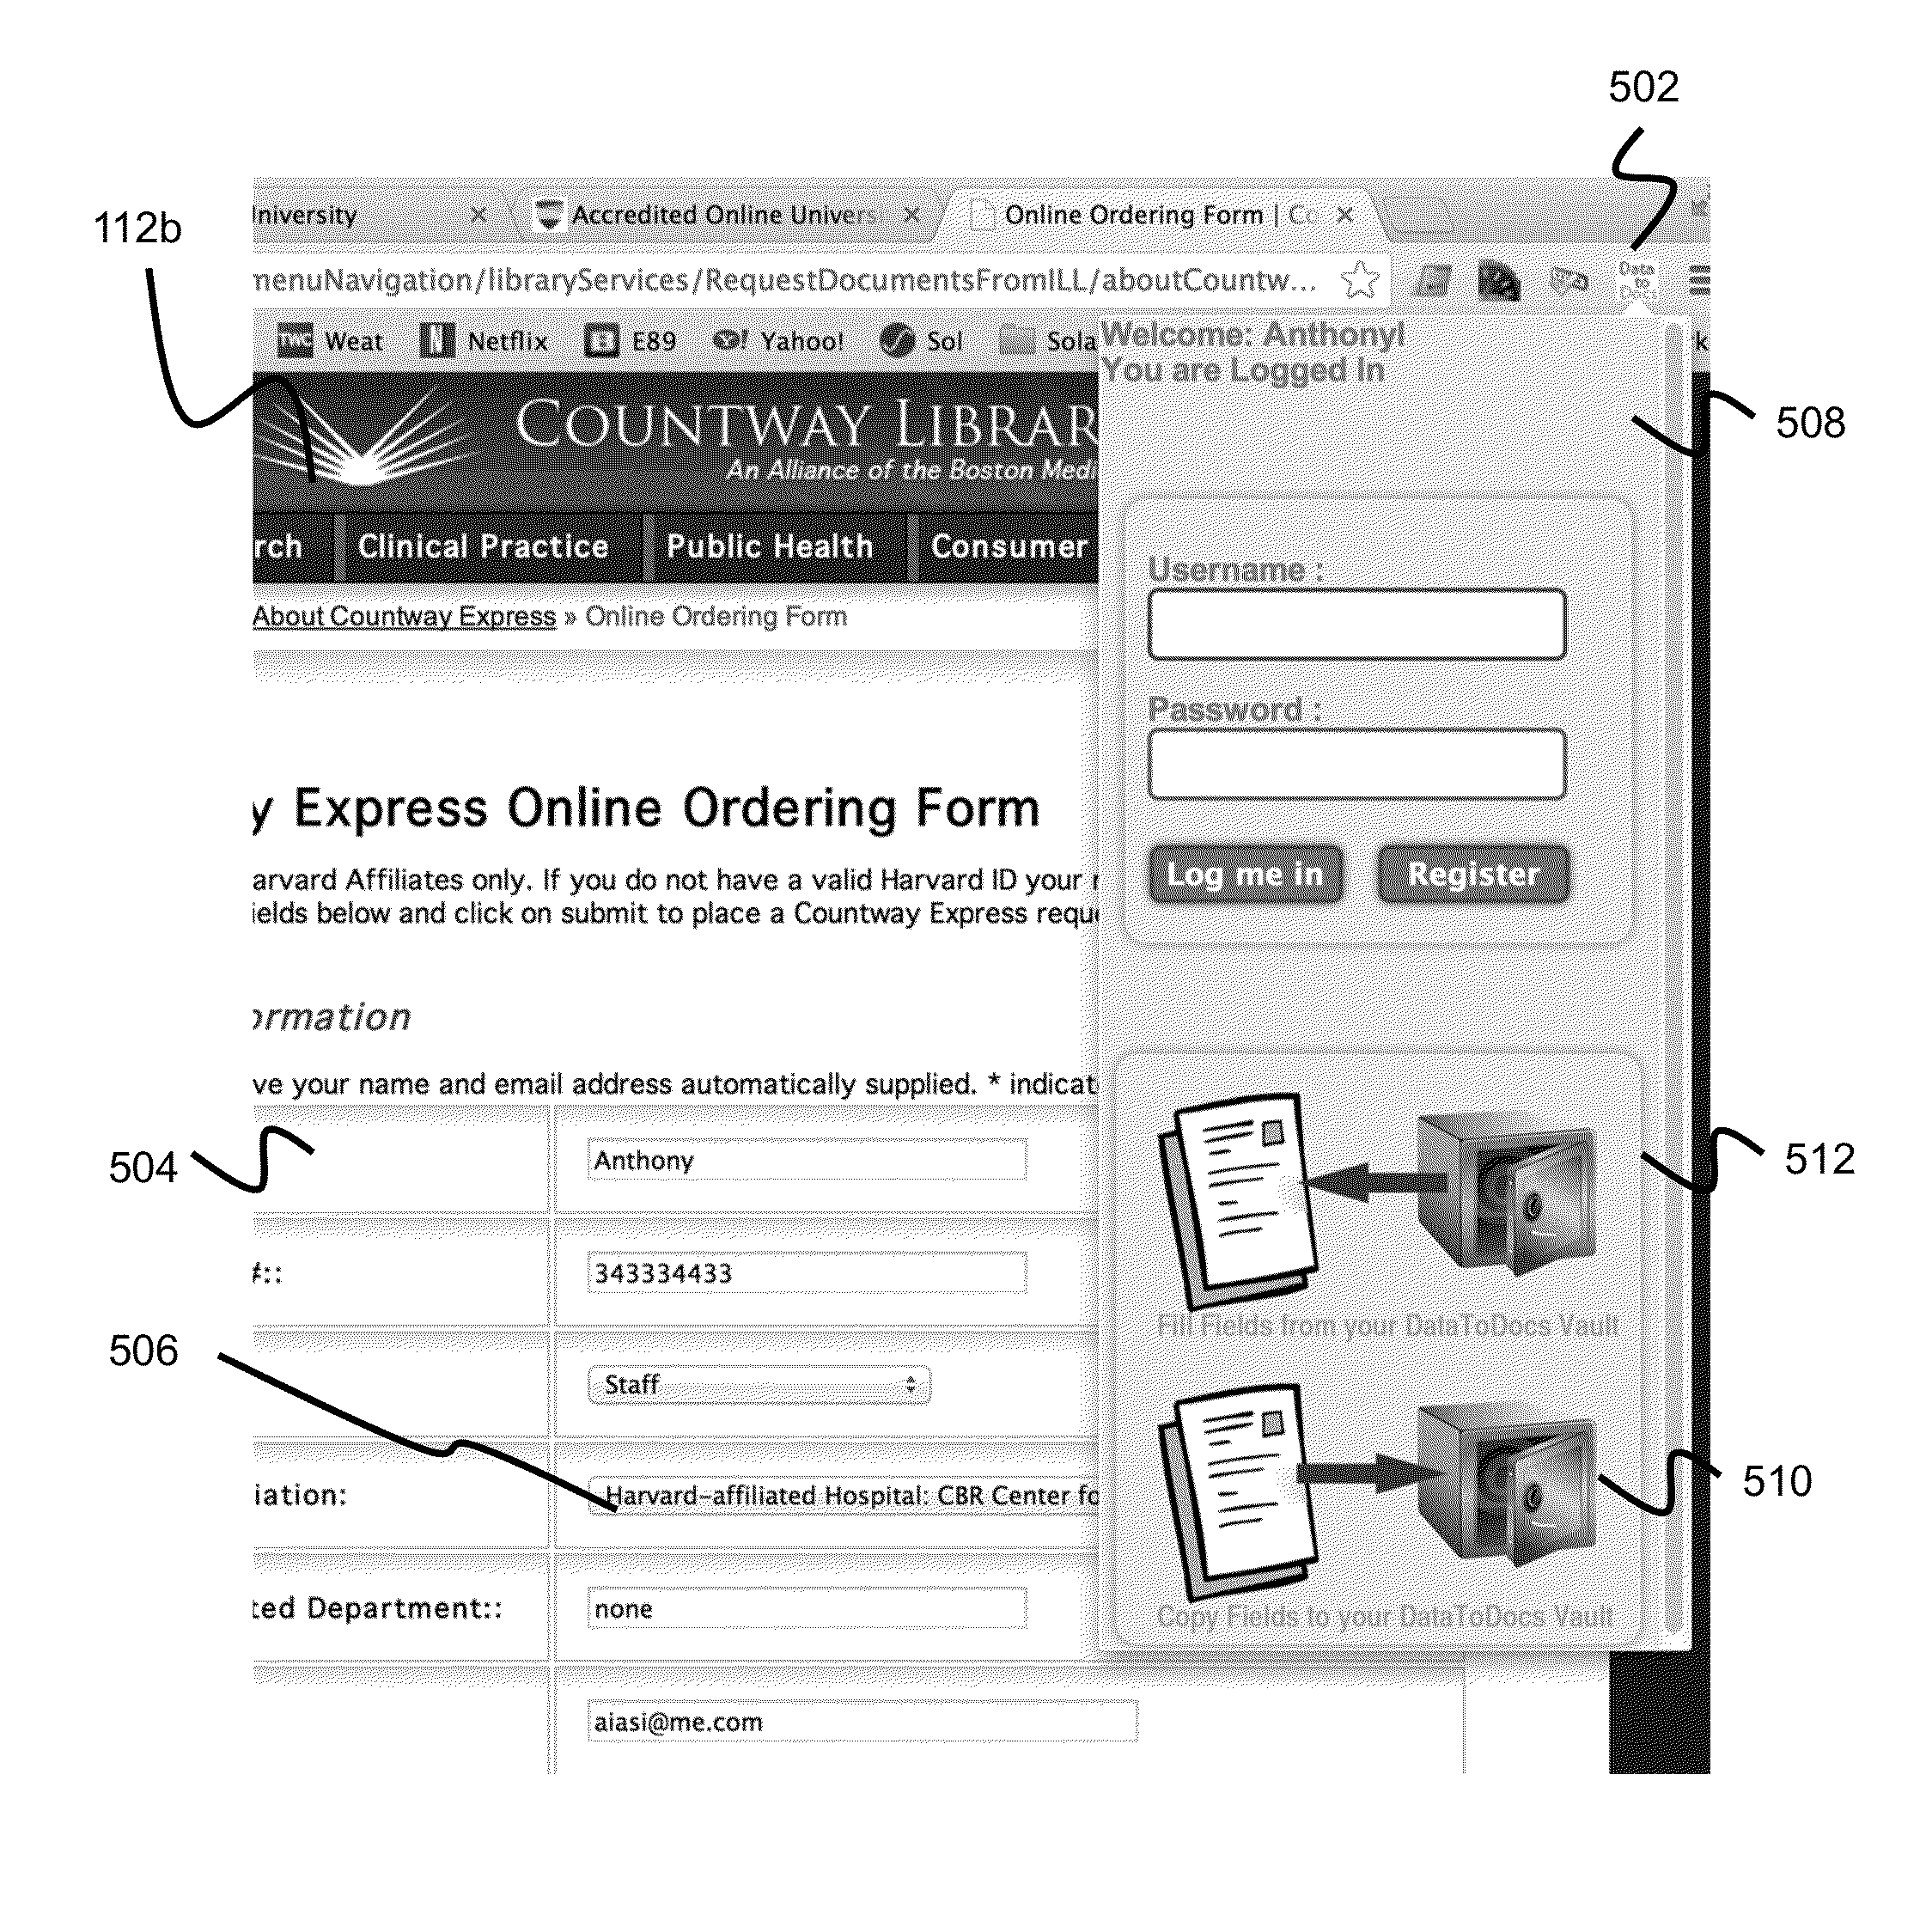 Systems and methods for collecting, classifying, organizing and populating information on electronic forms